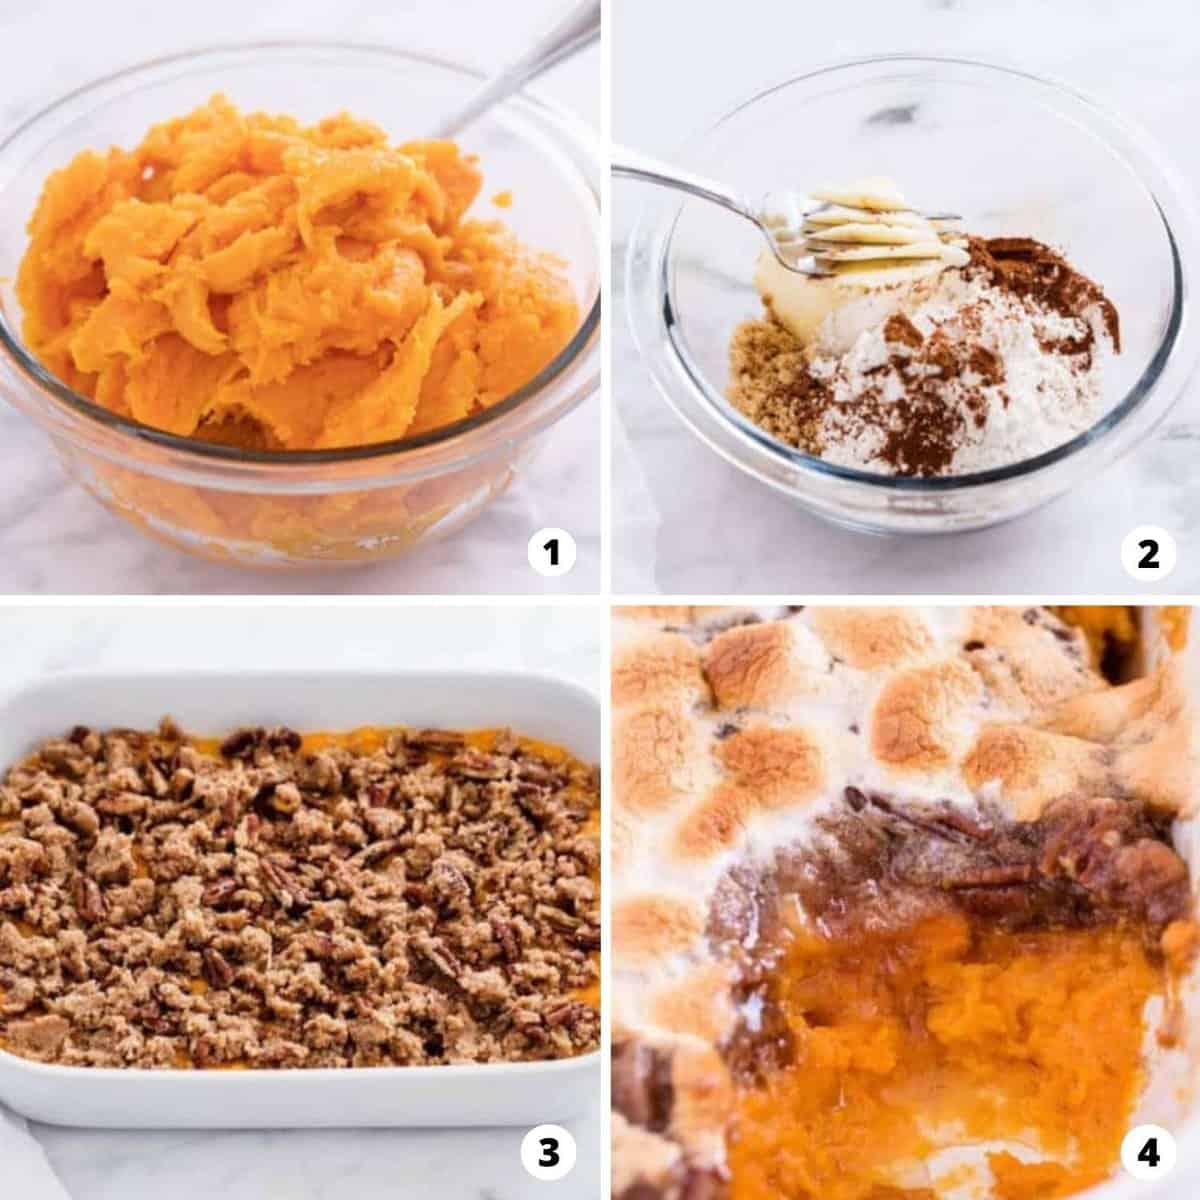 The process of making sweet potato casserole in a four step photo collage.